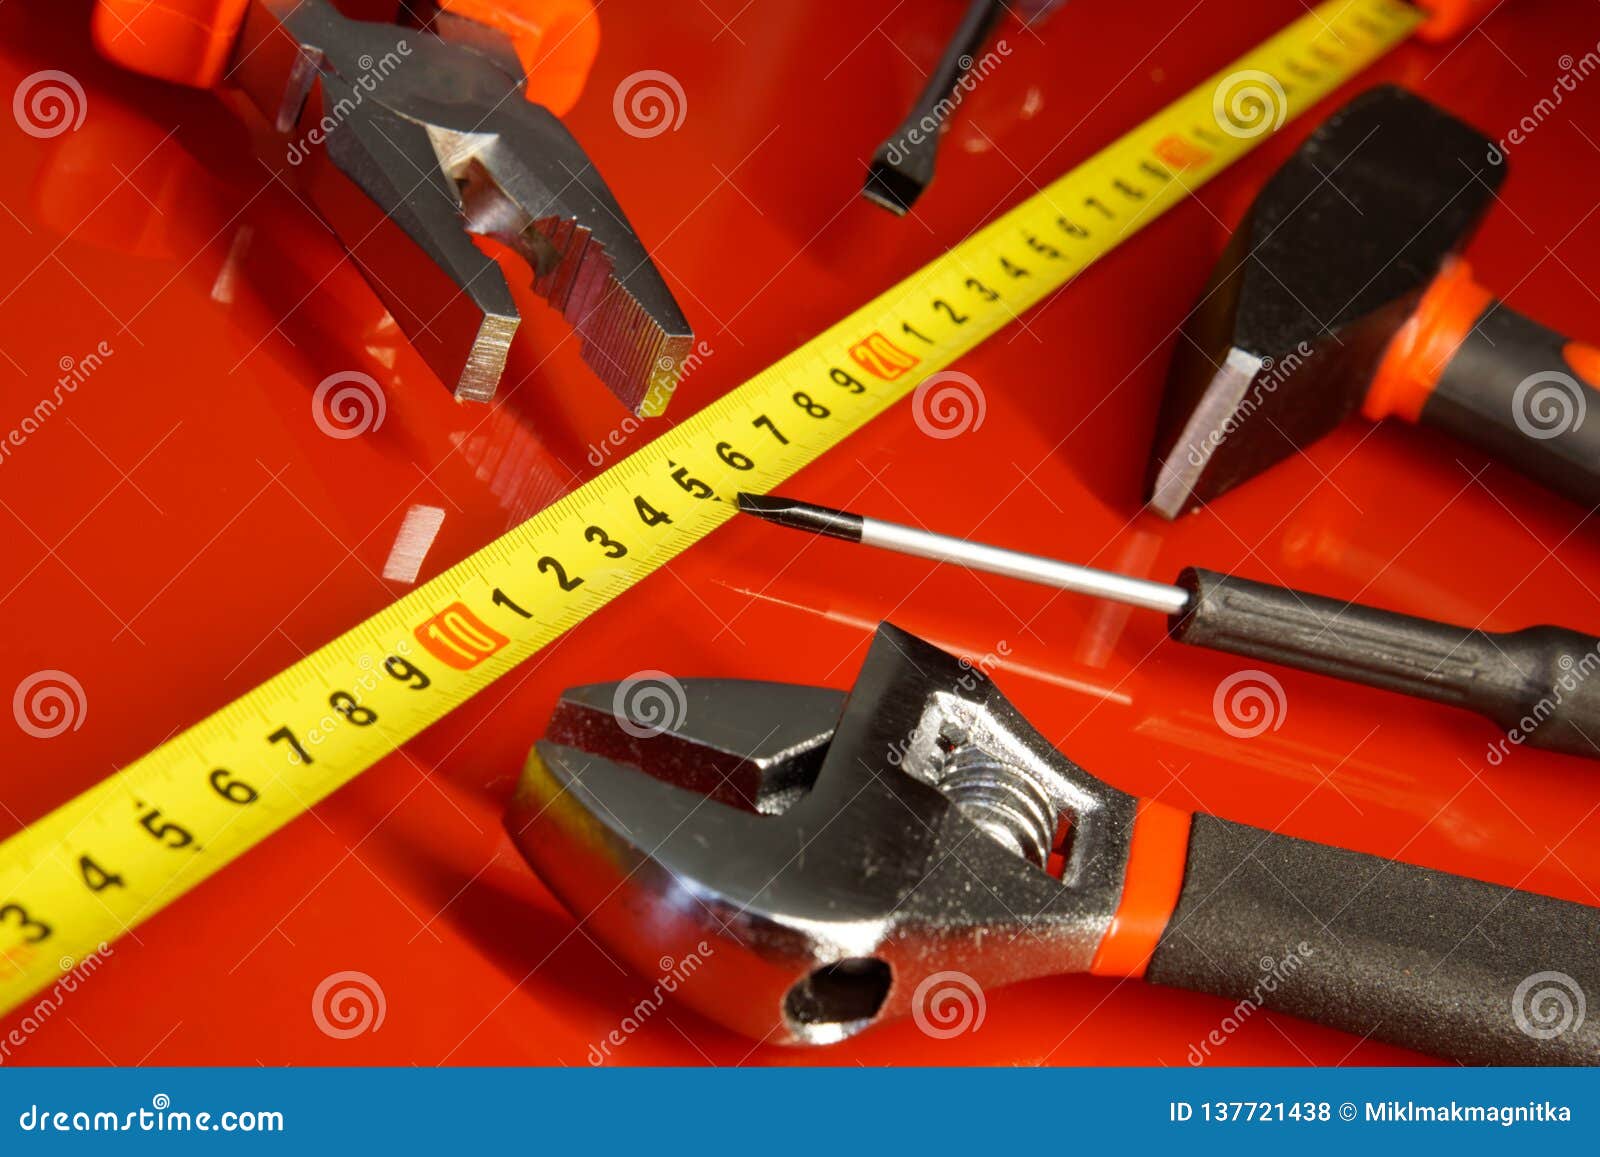 Tape Measure Screwdriver Hammer Pliers And Other Tools Lie On A Red